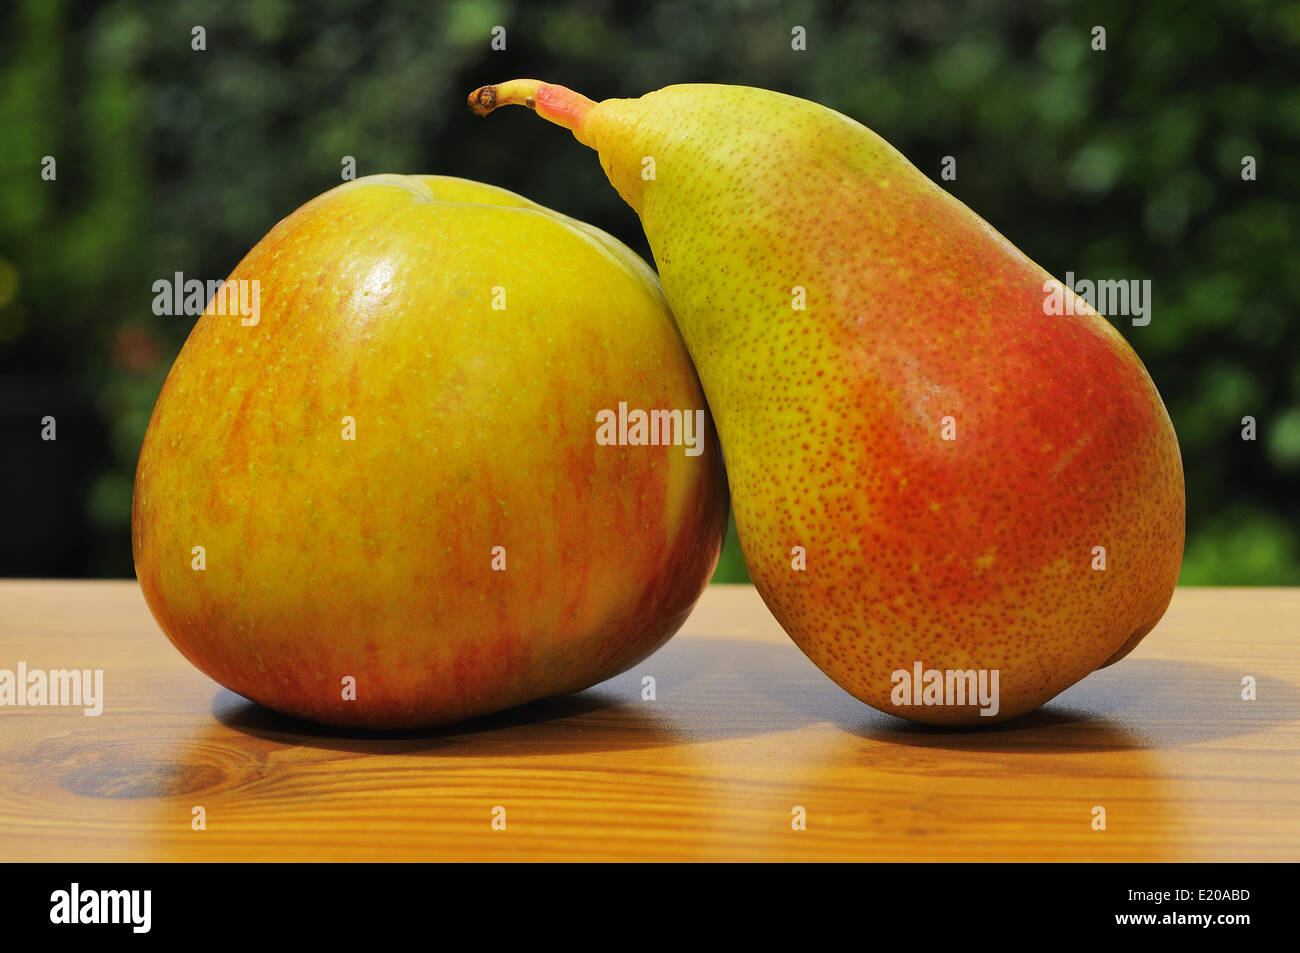 Pear and apple. Stock Photo